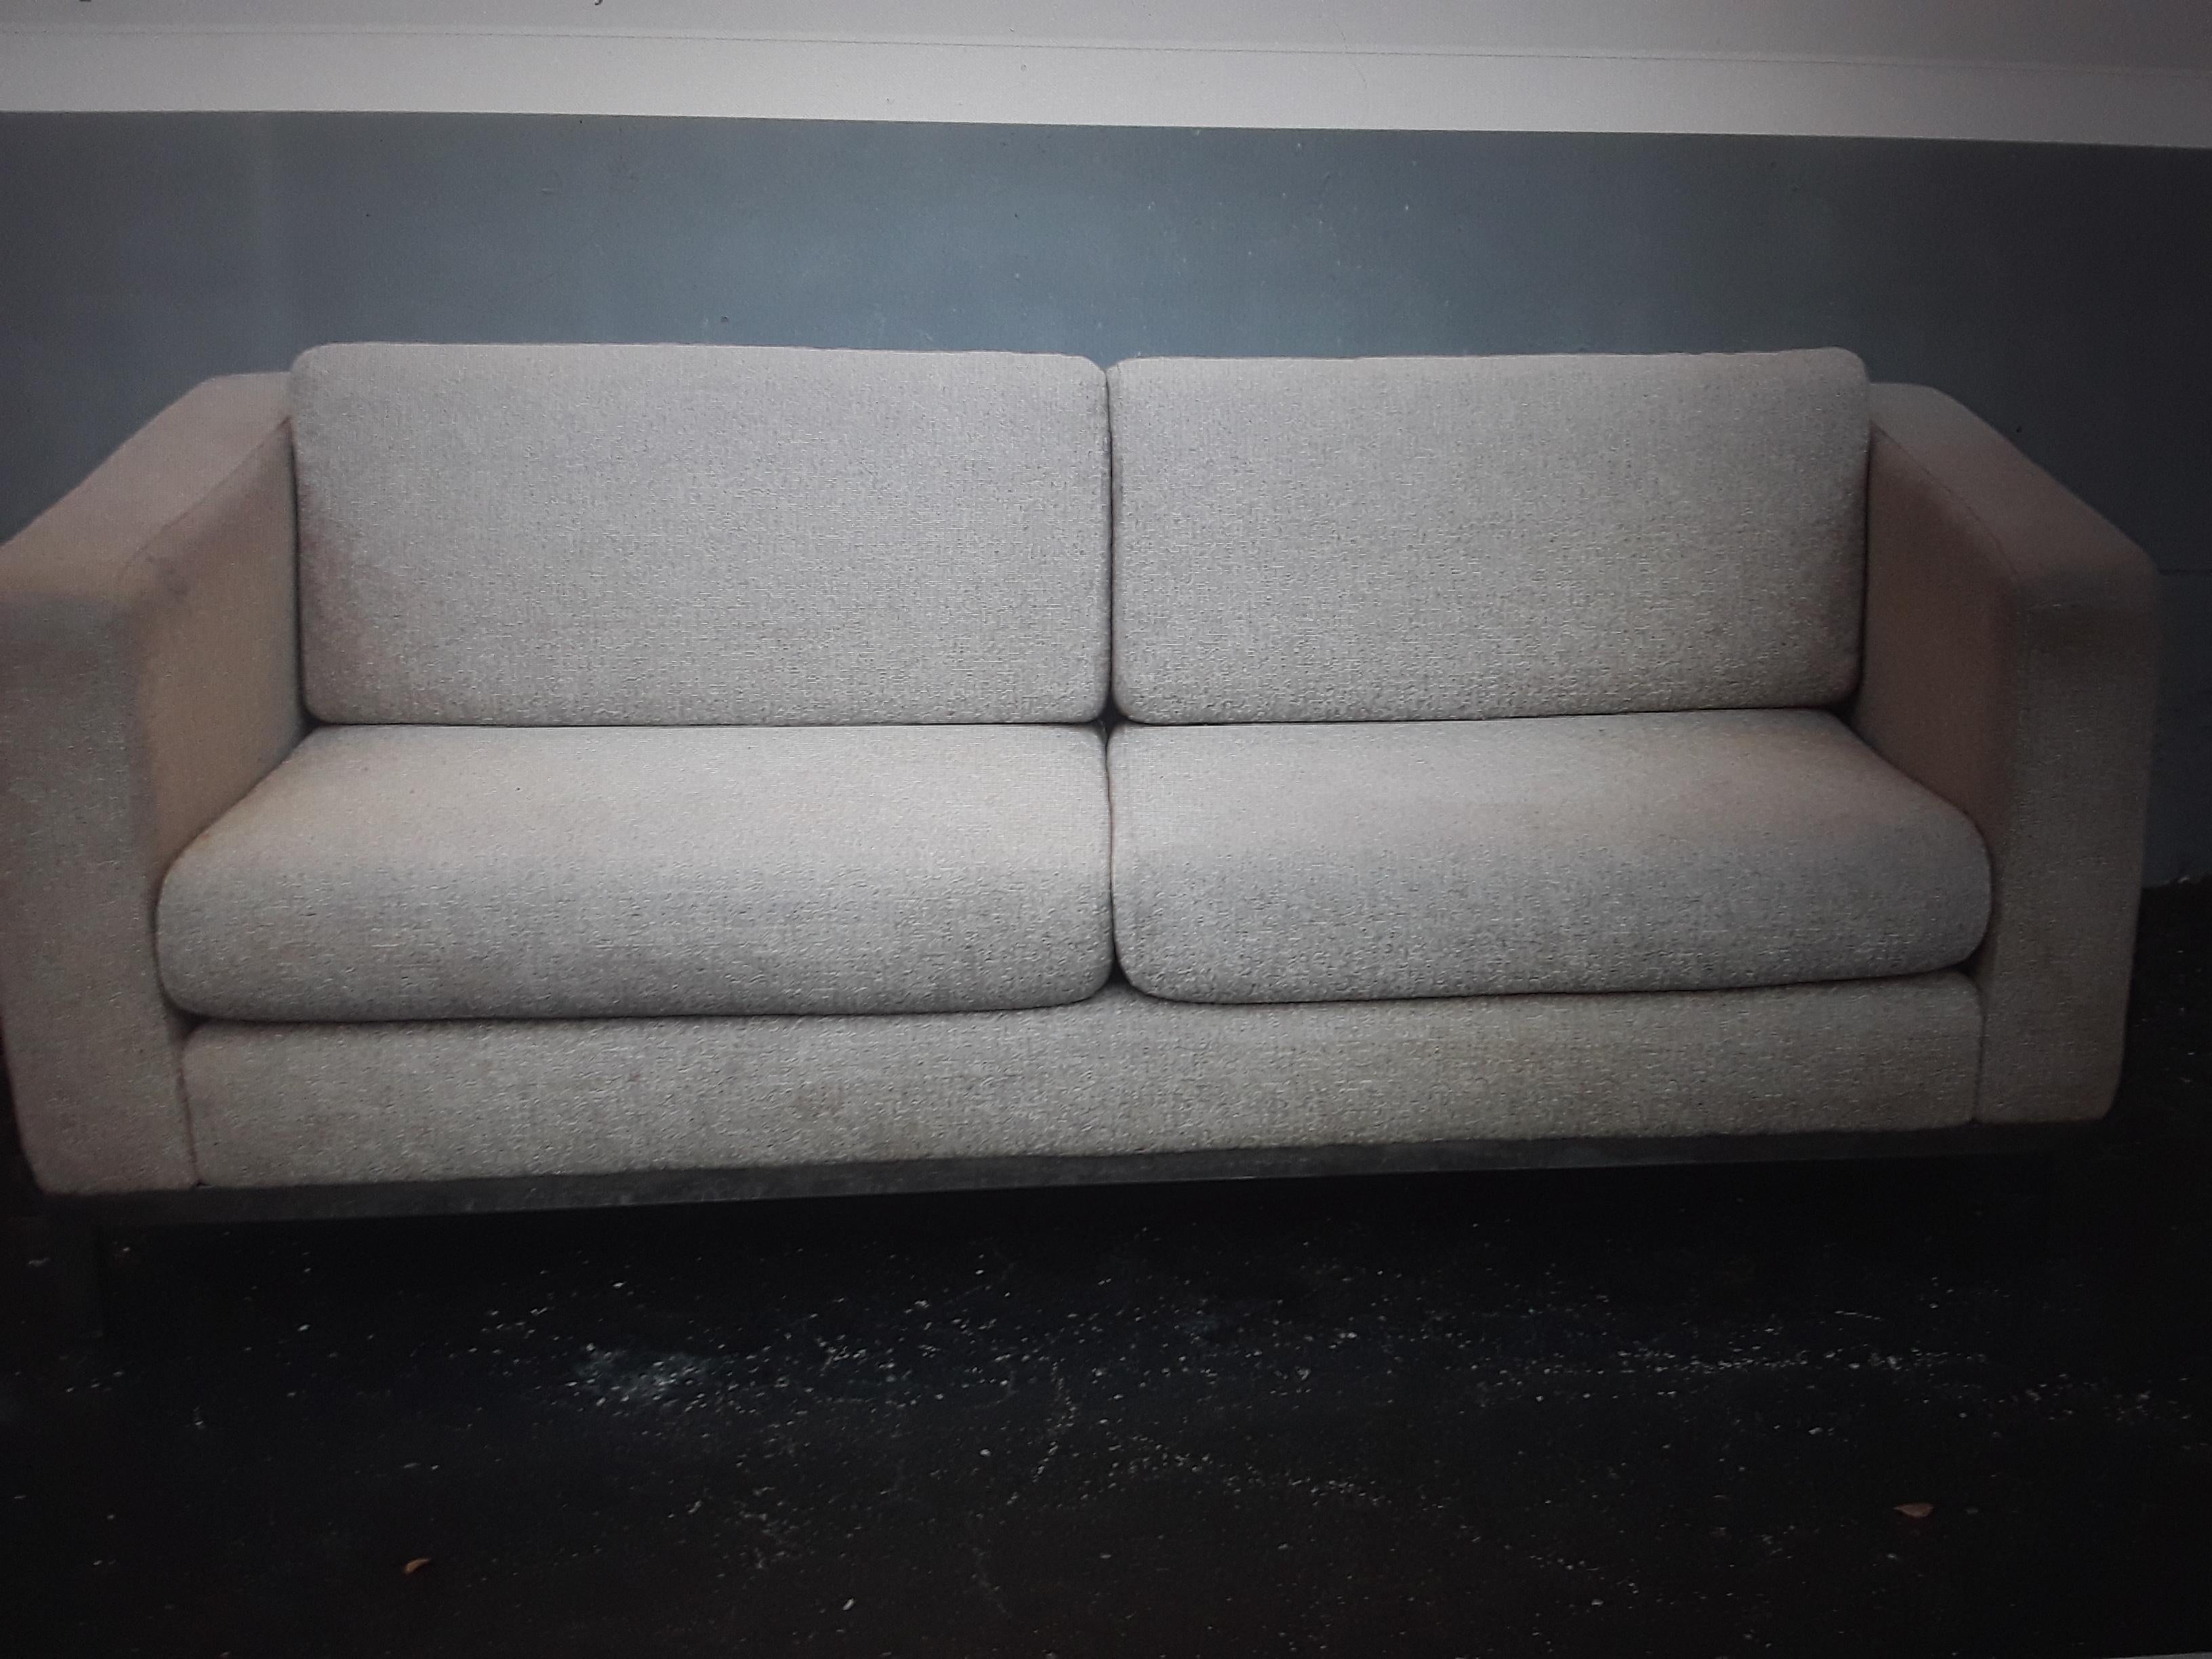 1970's Ultra Modern 4 Seat Sofa Doubles as a Daybed. Extra wide and taking off the back pillows will all for Daybed use.